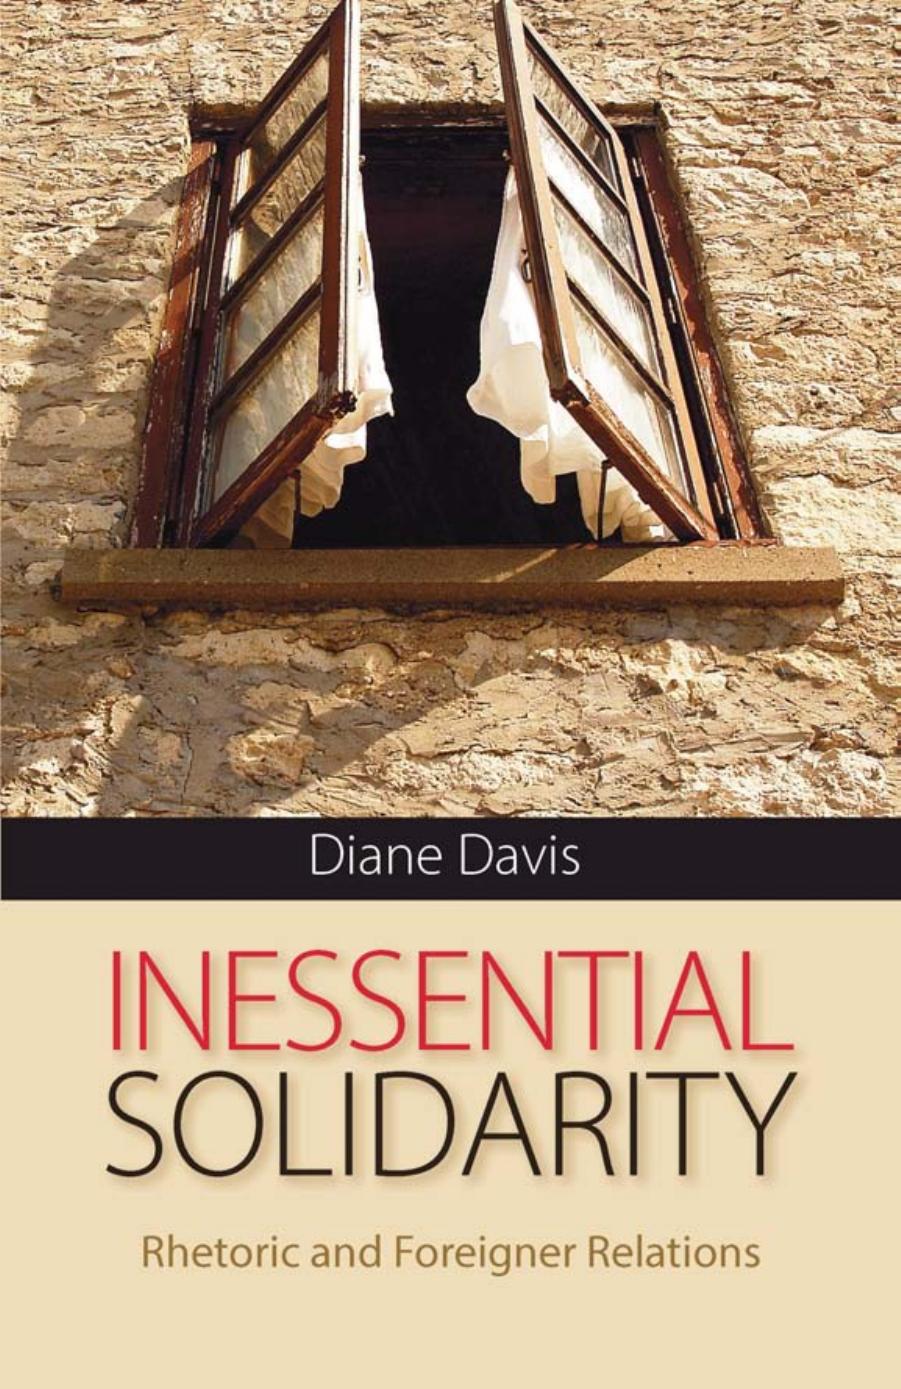 Inessential Solidarity: Rhetoric and Foreigner Relations by Diane Davis